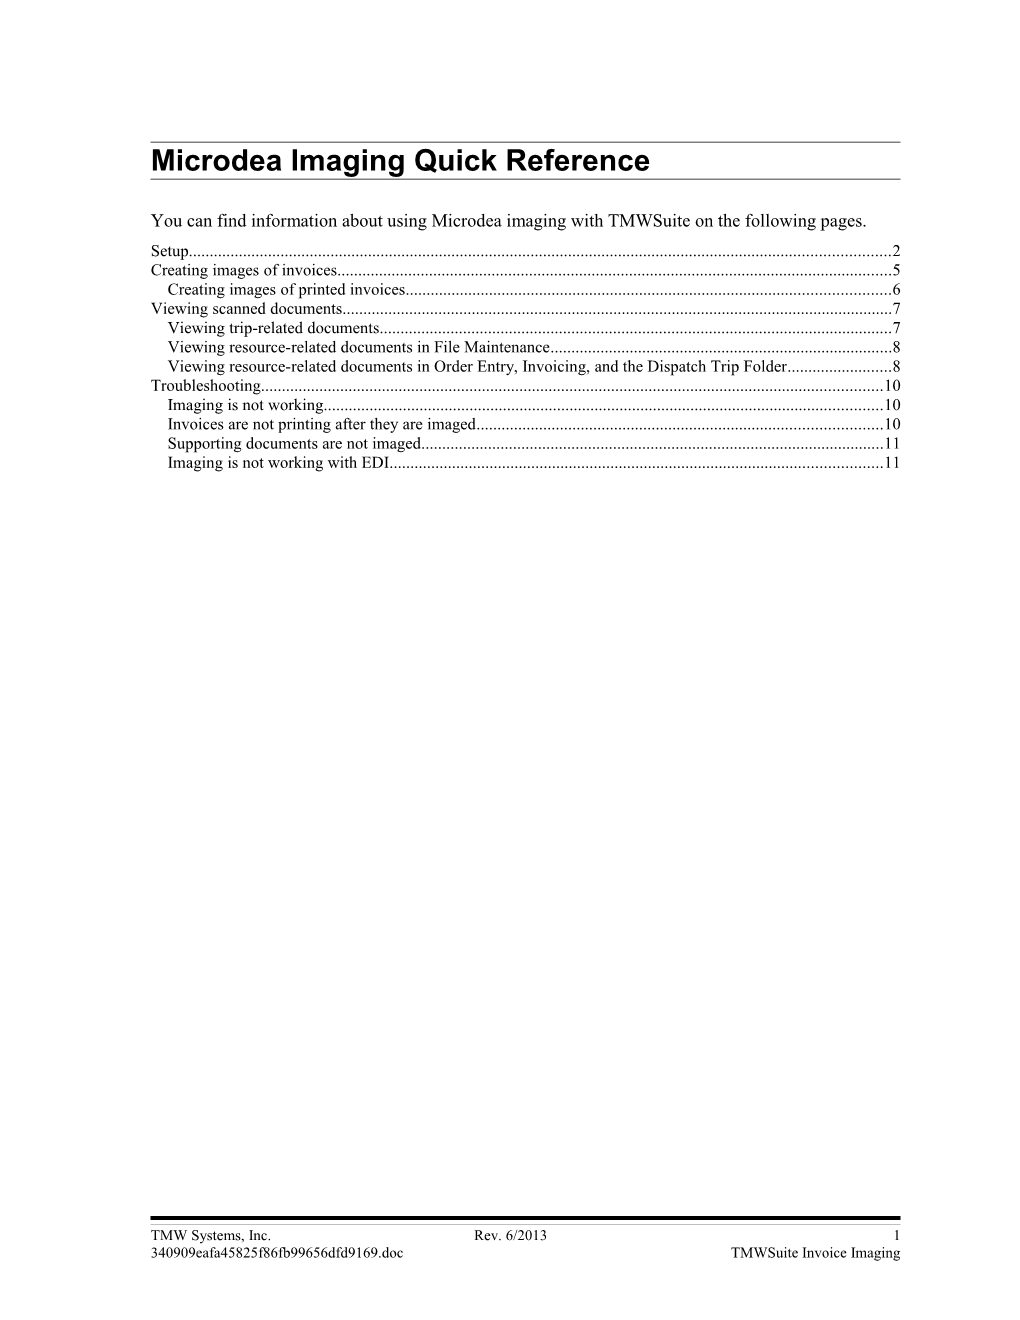 Microdea Imaging Quick Reference